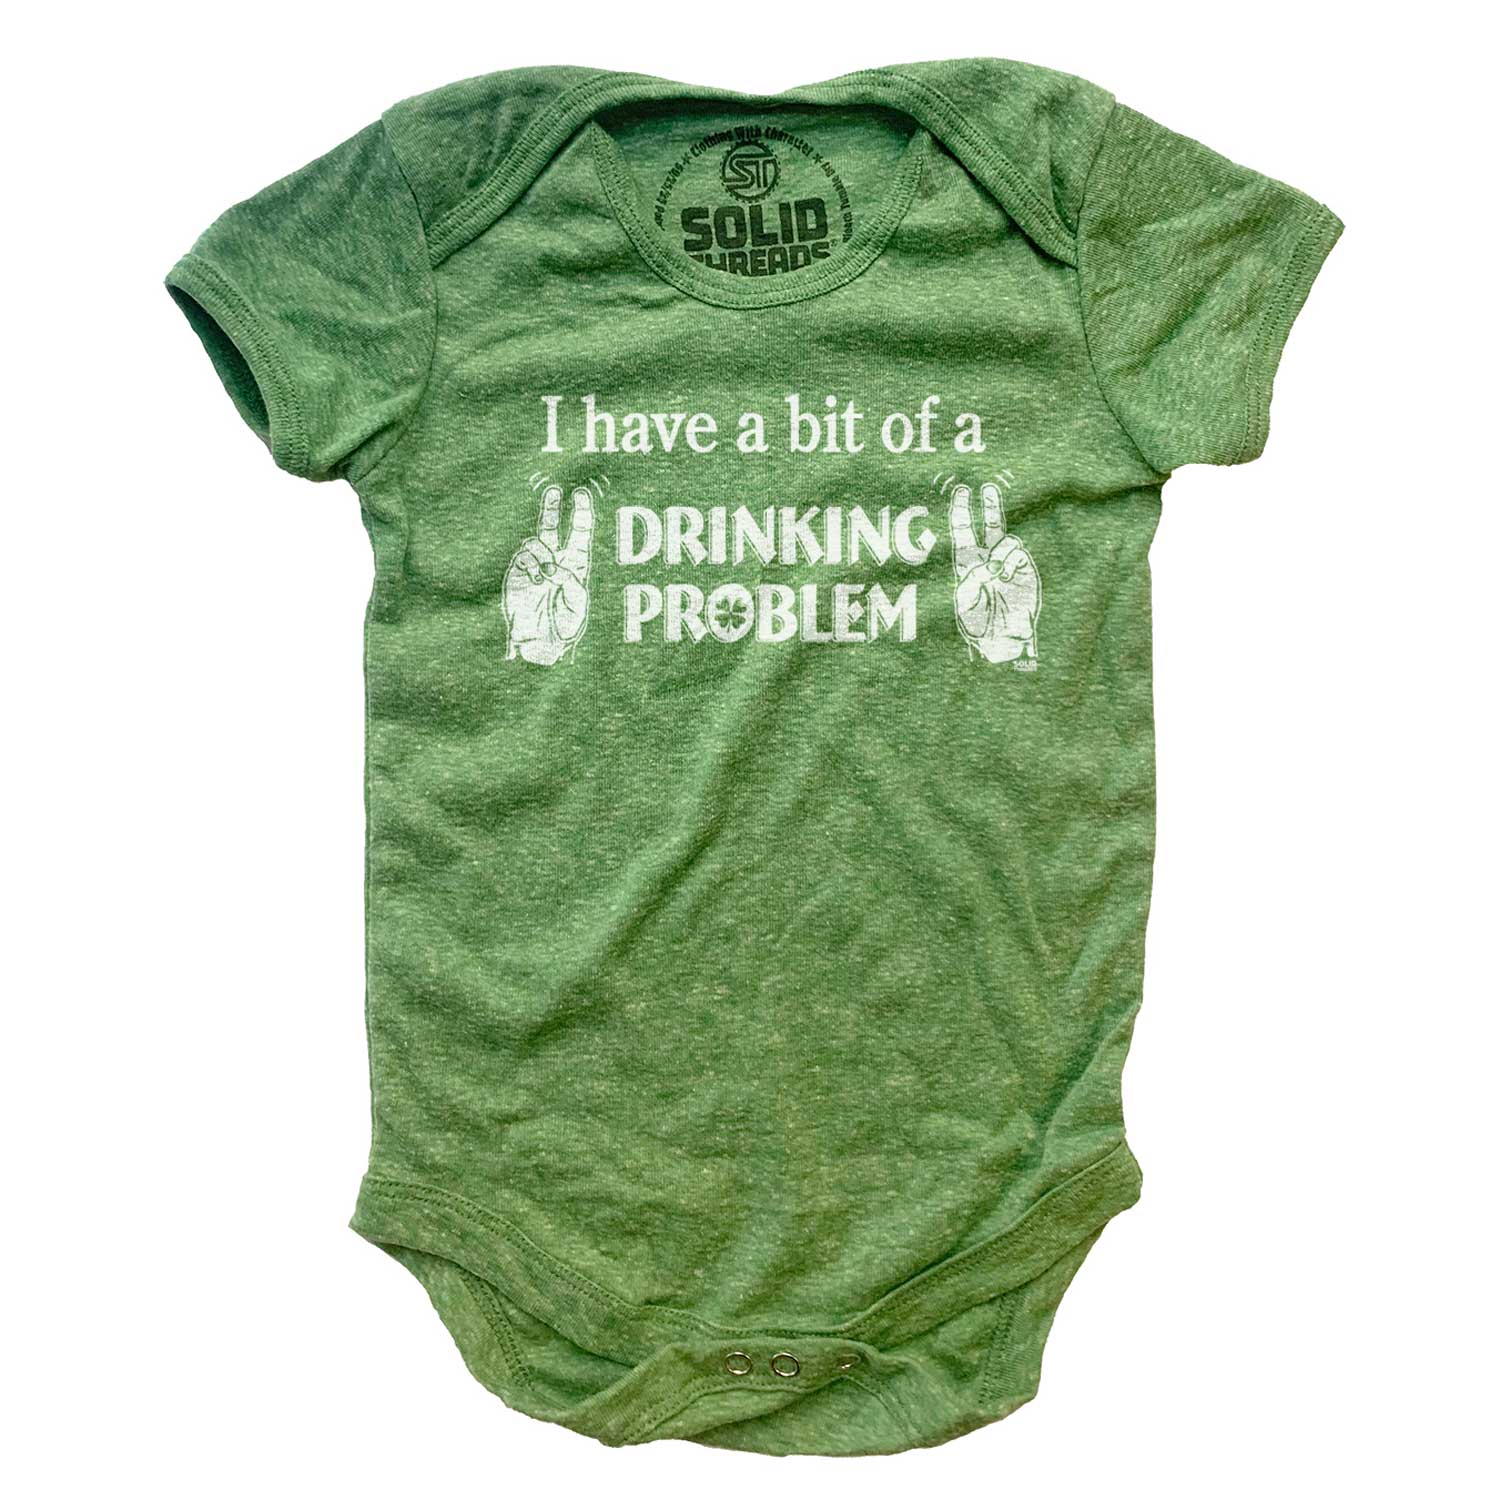 Baby Have A Bit Drinking Problem Retro Graphic One Piece | Funny Party Soft Romper | Solid Threads